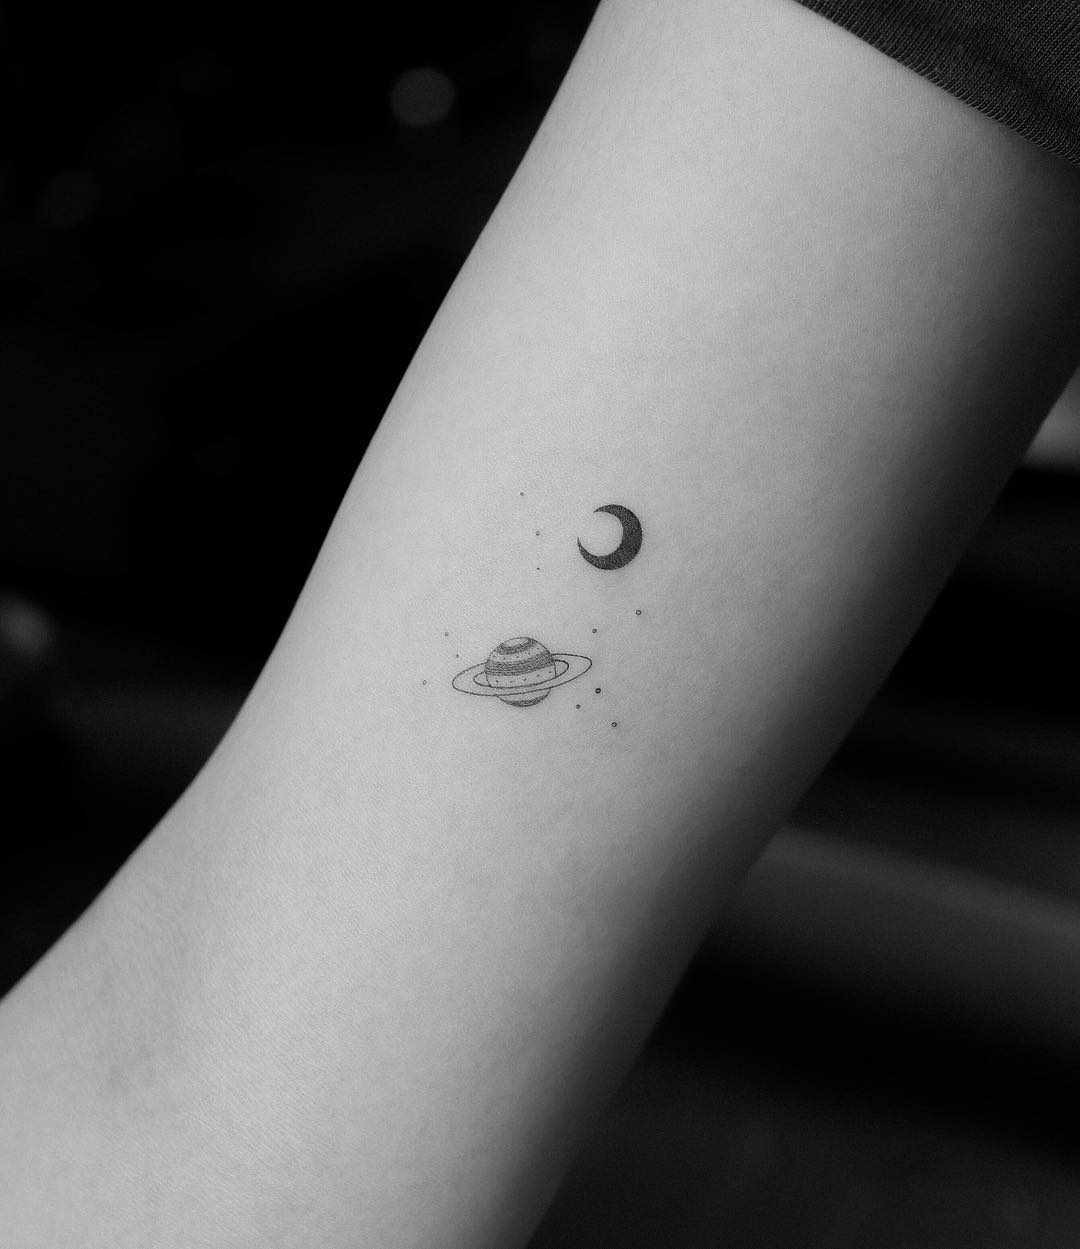 Tiny Saturn and moon tattoos by Jakub Nowicz